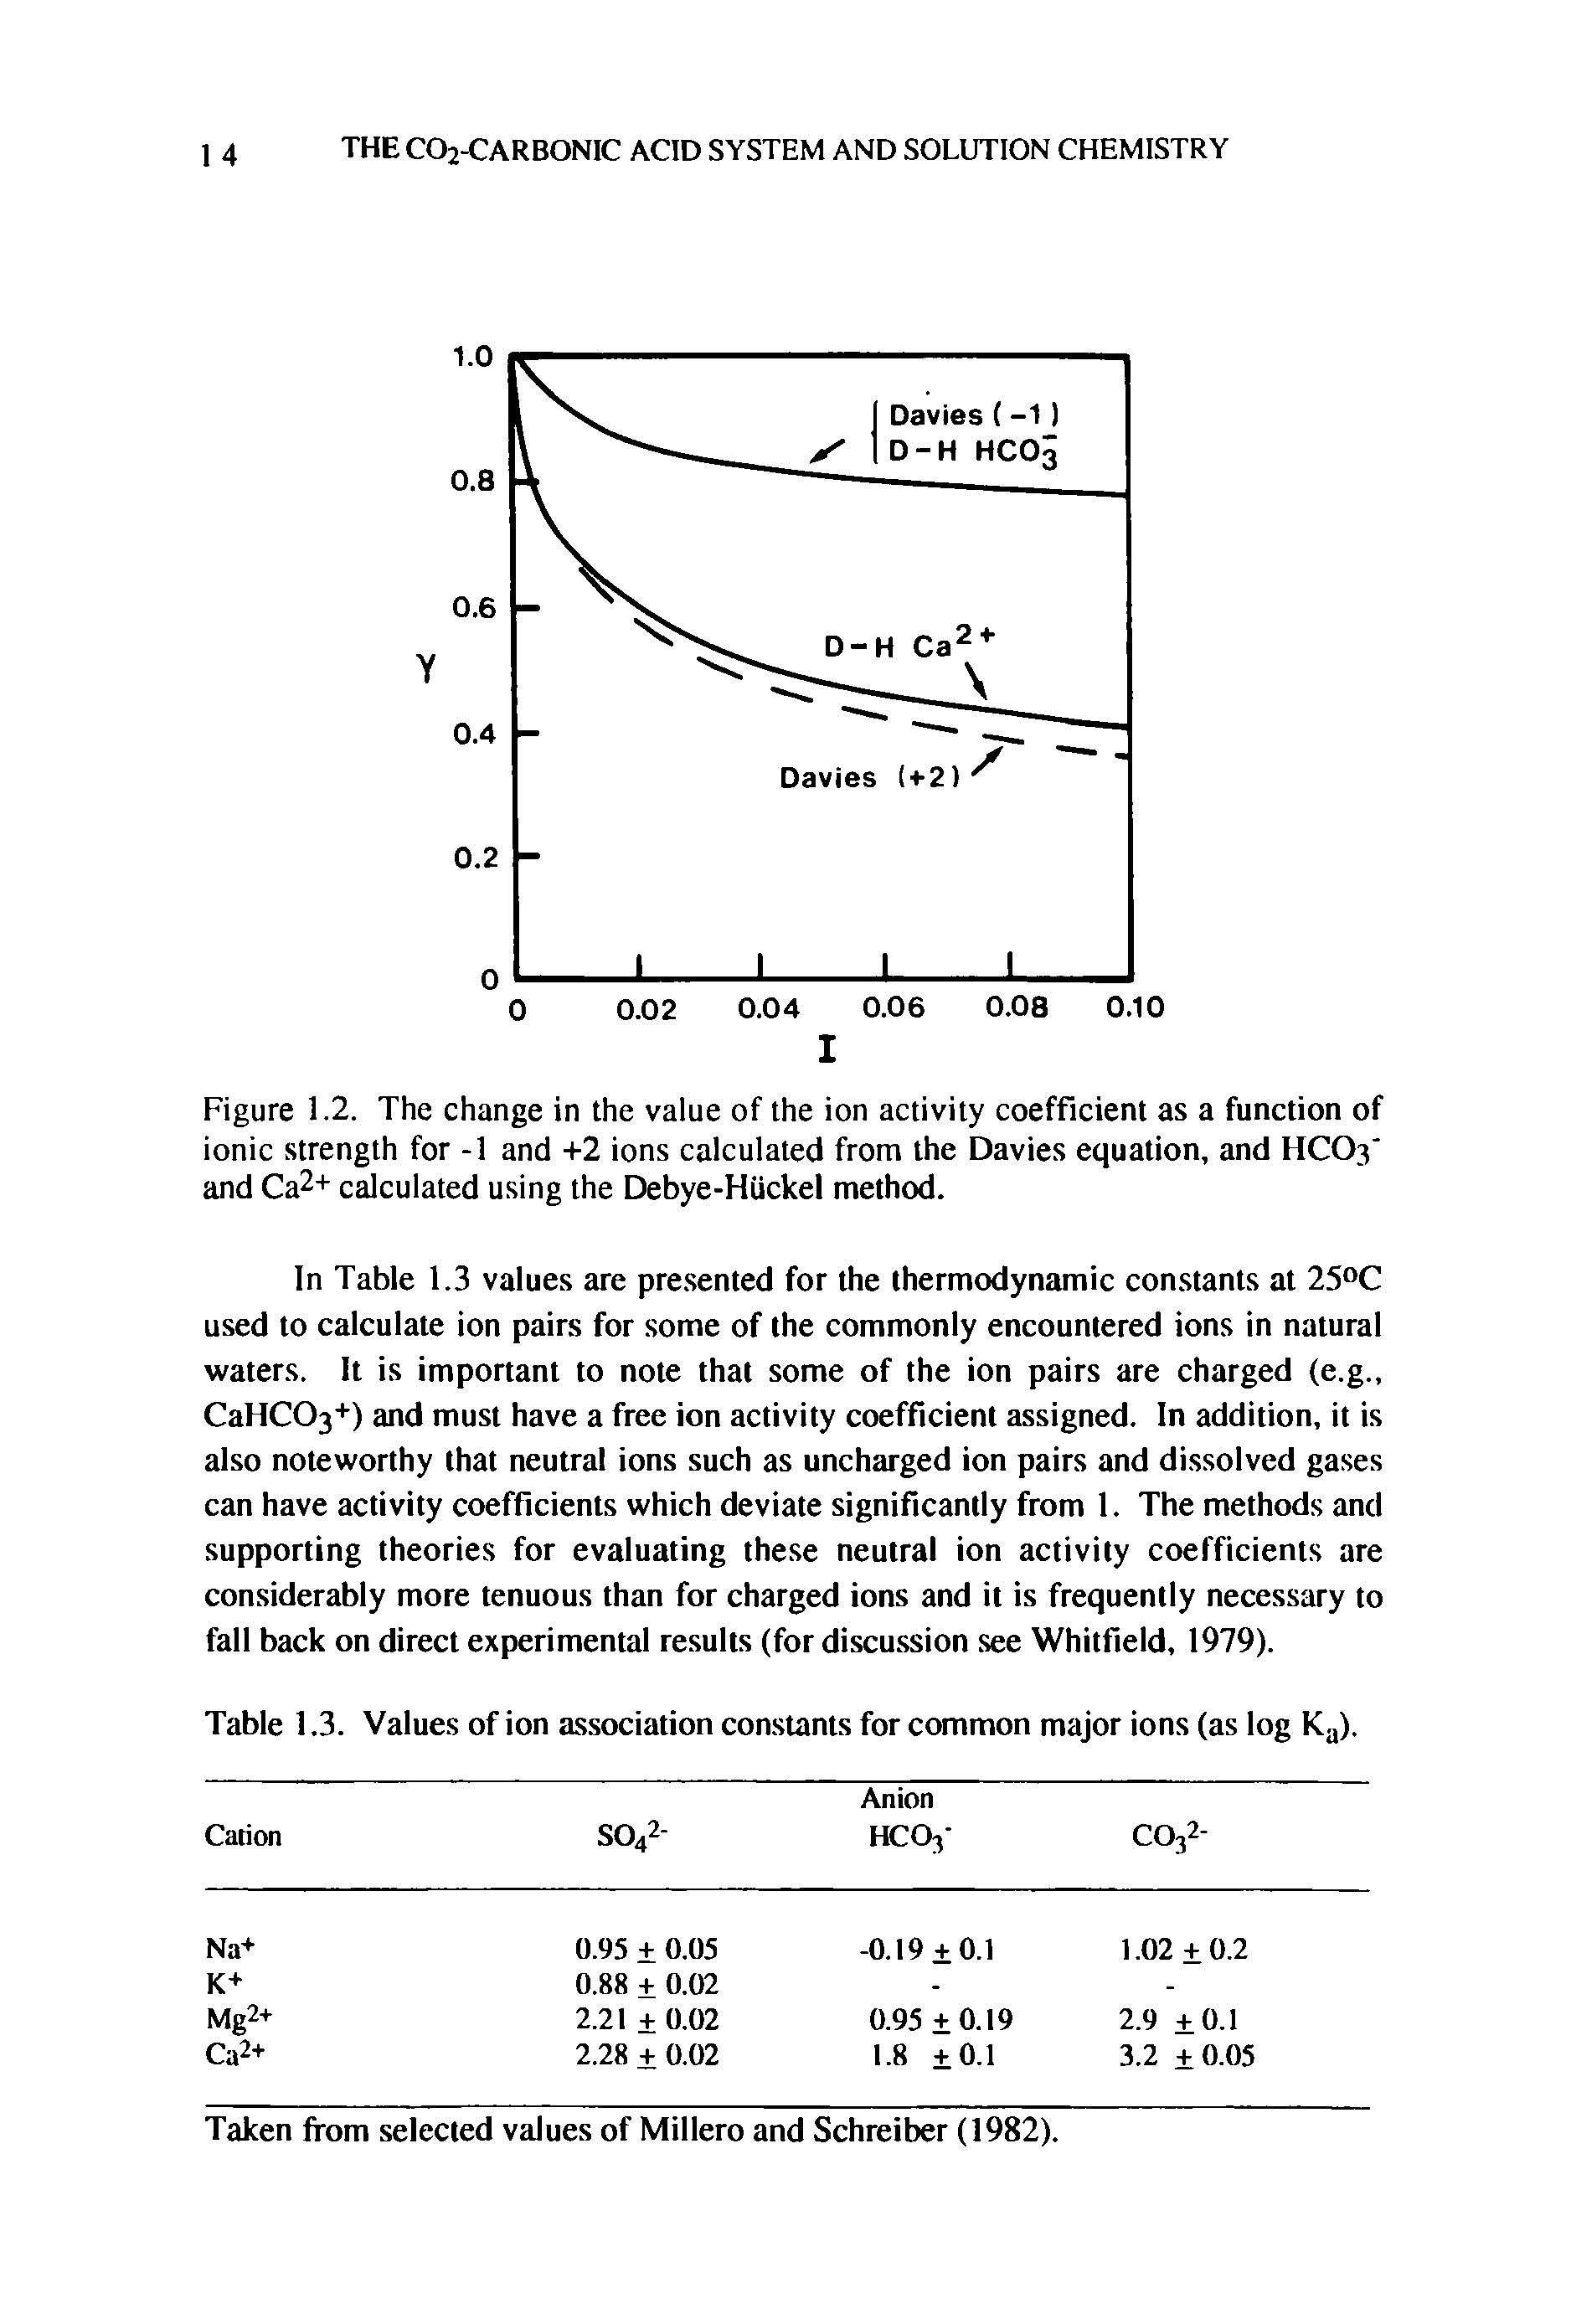 Figure 1.2. The change in the value of the ion activity coefficient as a function of ionic strength for -1 and +2 ions calculated from the Davies equation, and HC03 and Ca2+ calculated using the Debye-Hiickel method.